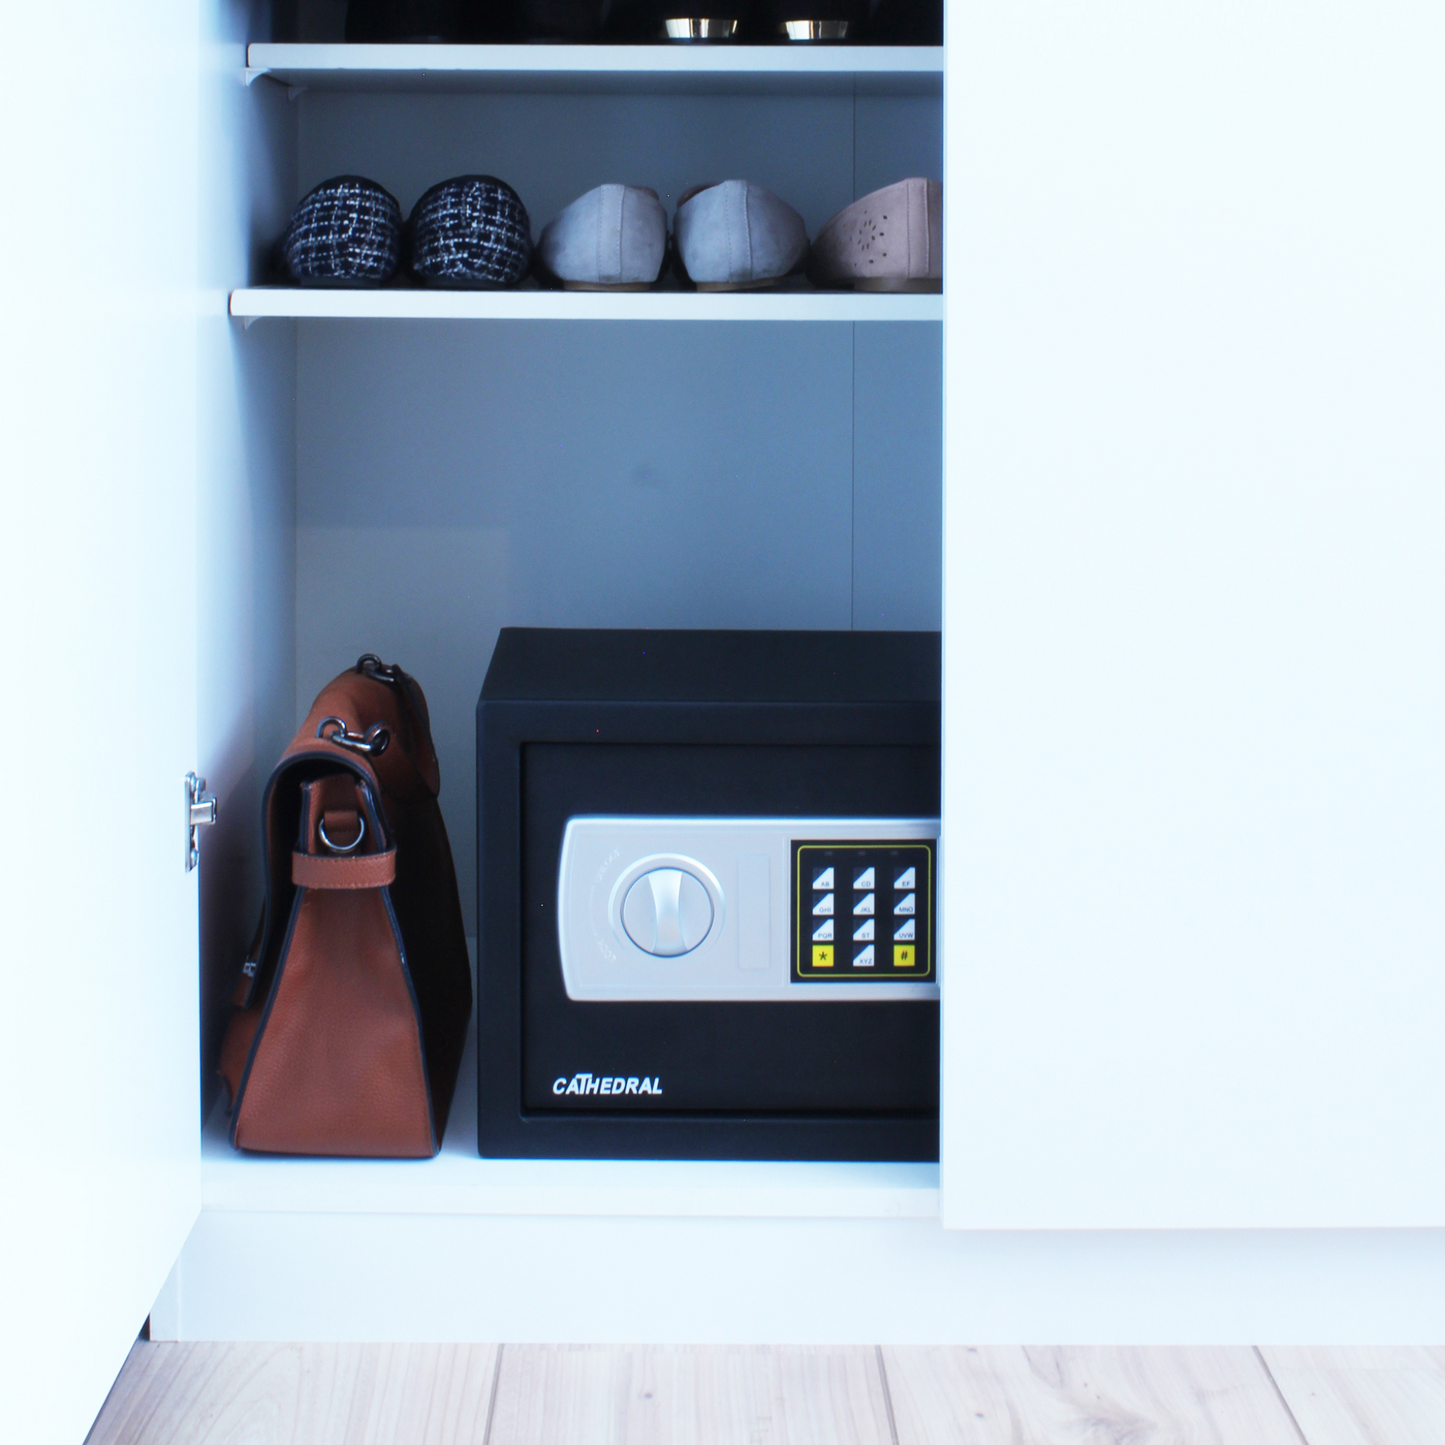 A Cathedral Products EA25 16 Litre Electronic Digital Safe with manual override is neatly tucked in a white cupboard beside a brown messenger bag, illustrating a practical and discreet home security solution.